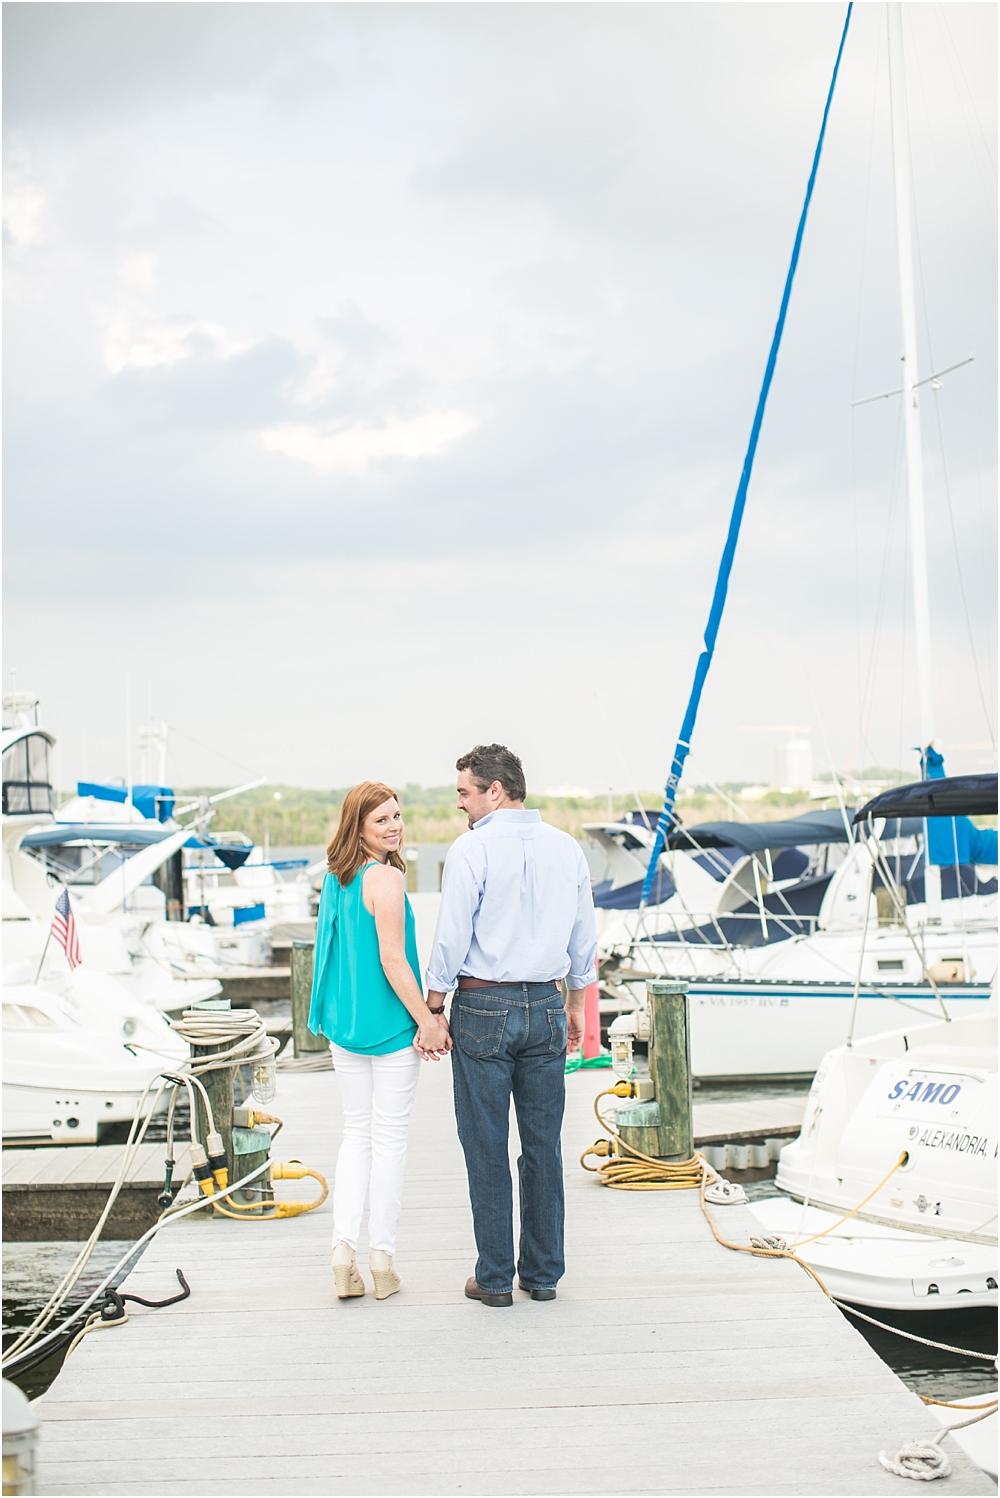 living radiant photography alexandria virginia engagement session clair billy photos_0016.jpg